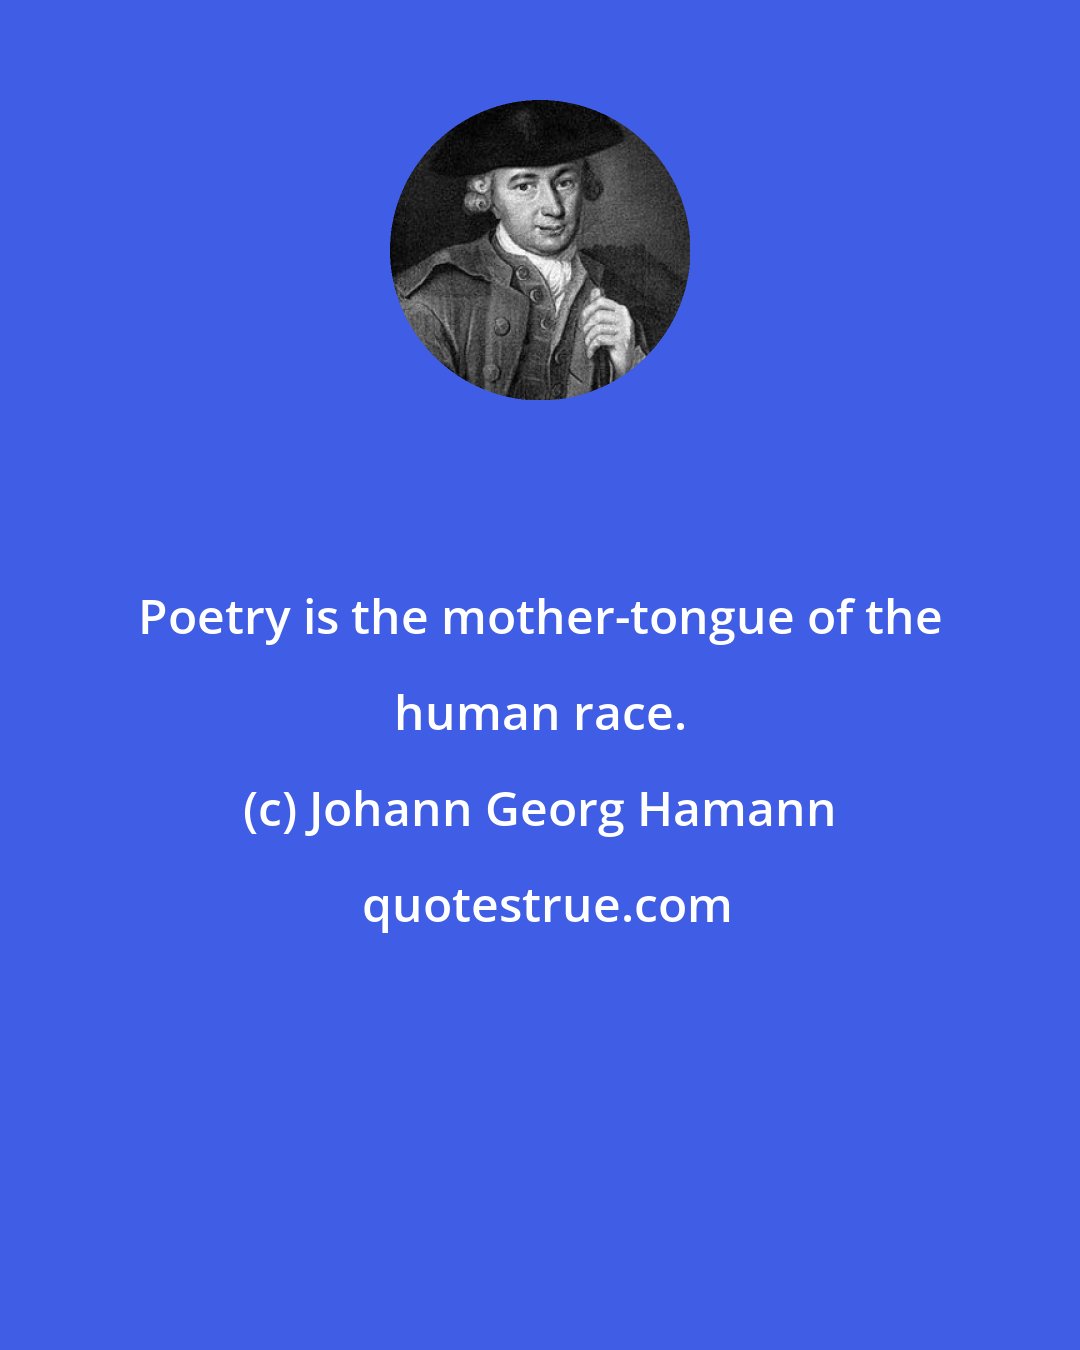 Johann Georg Hamann: Poetry is the mother-tongue of the human race.